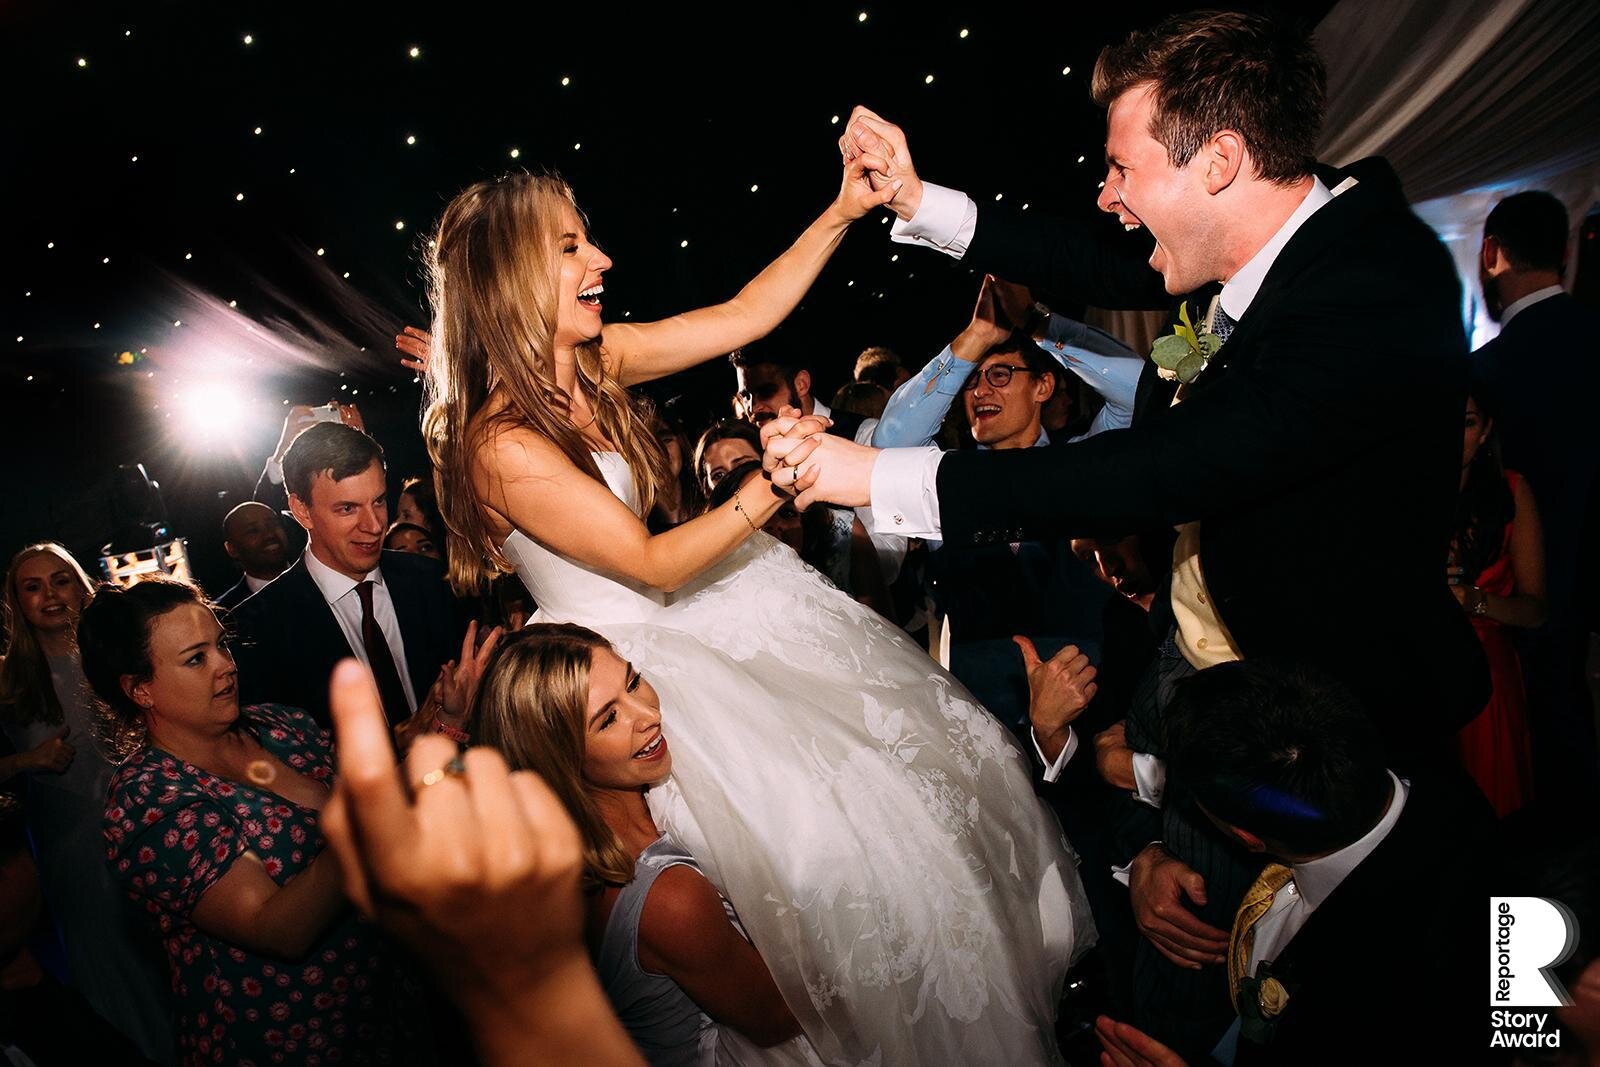  Bride and groom lifted by friends on a busy dance floor 